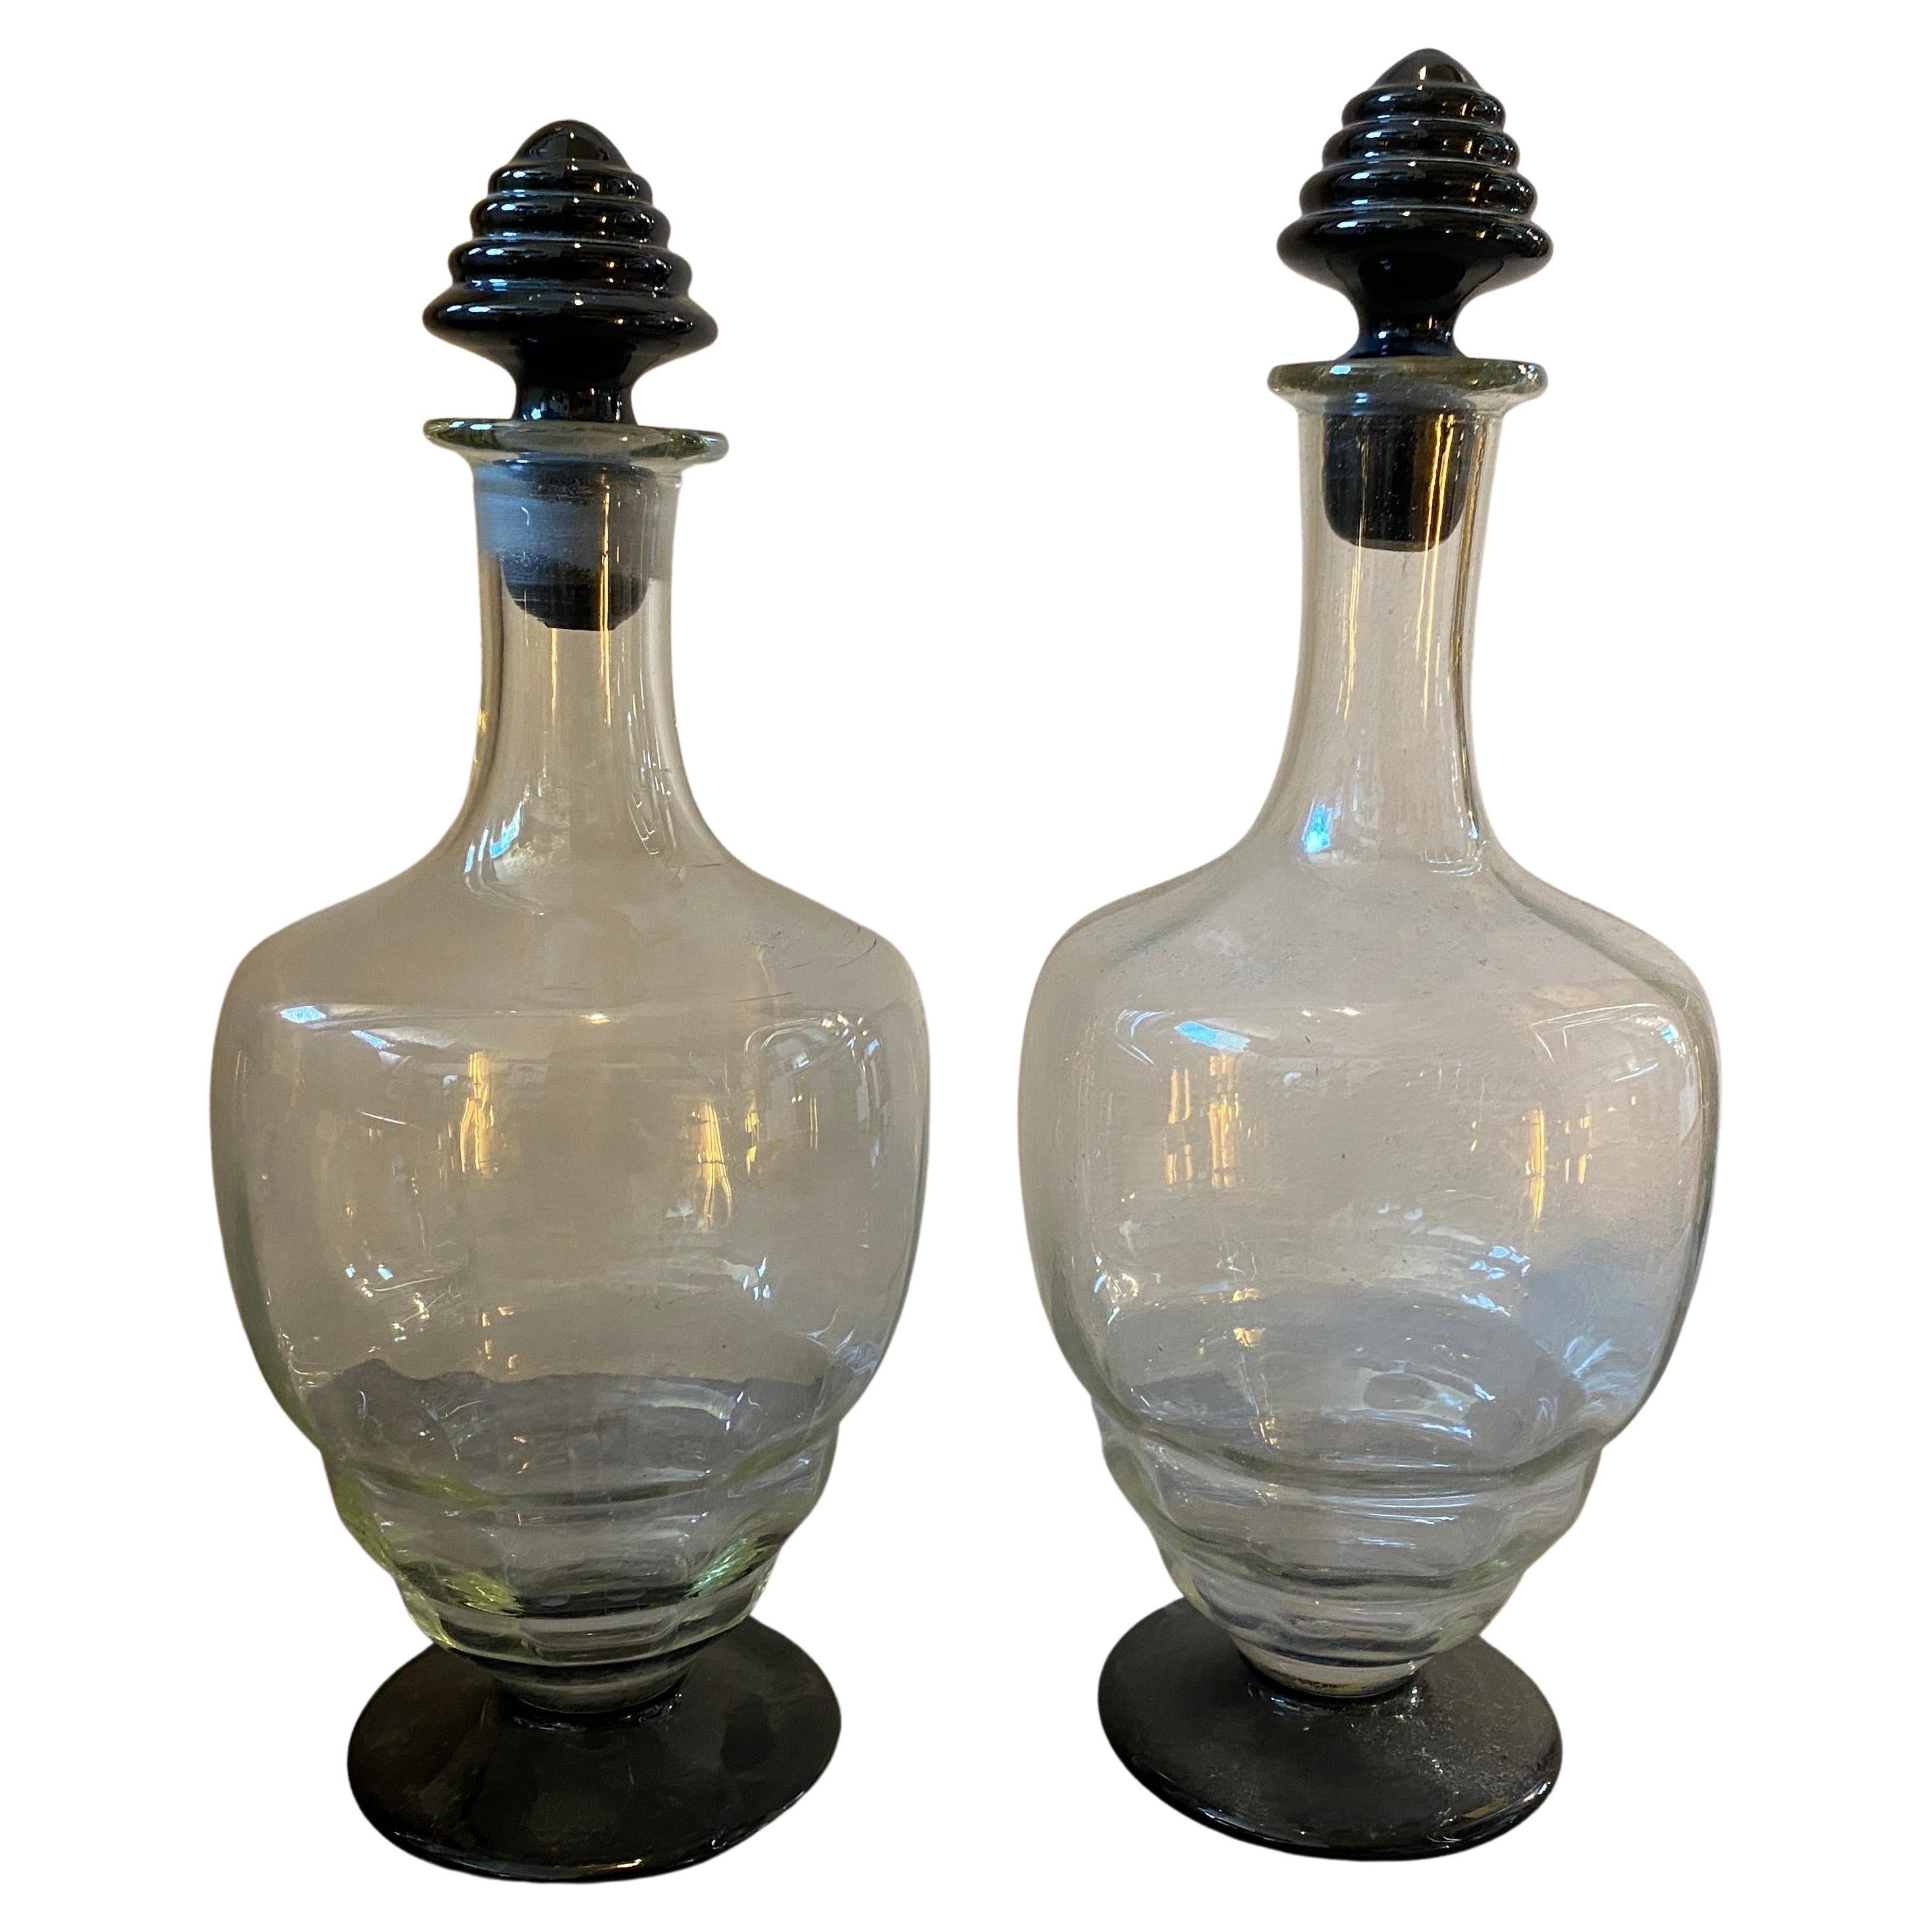 Two clear and black murano glass liquor bottles manufactured in Italy in the Thirties in the style of Napoleone Martinuzzi. One bottle it's 31 cm in height, the other one is 29 cm in height. They are in perfect condition as you can see in the